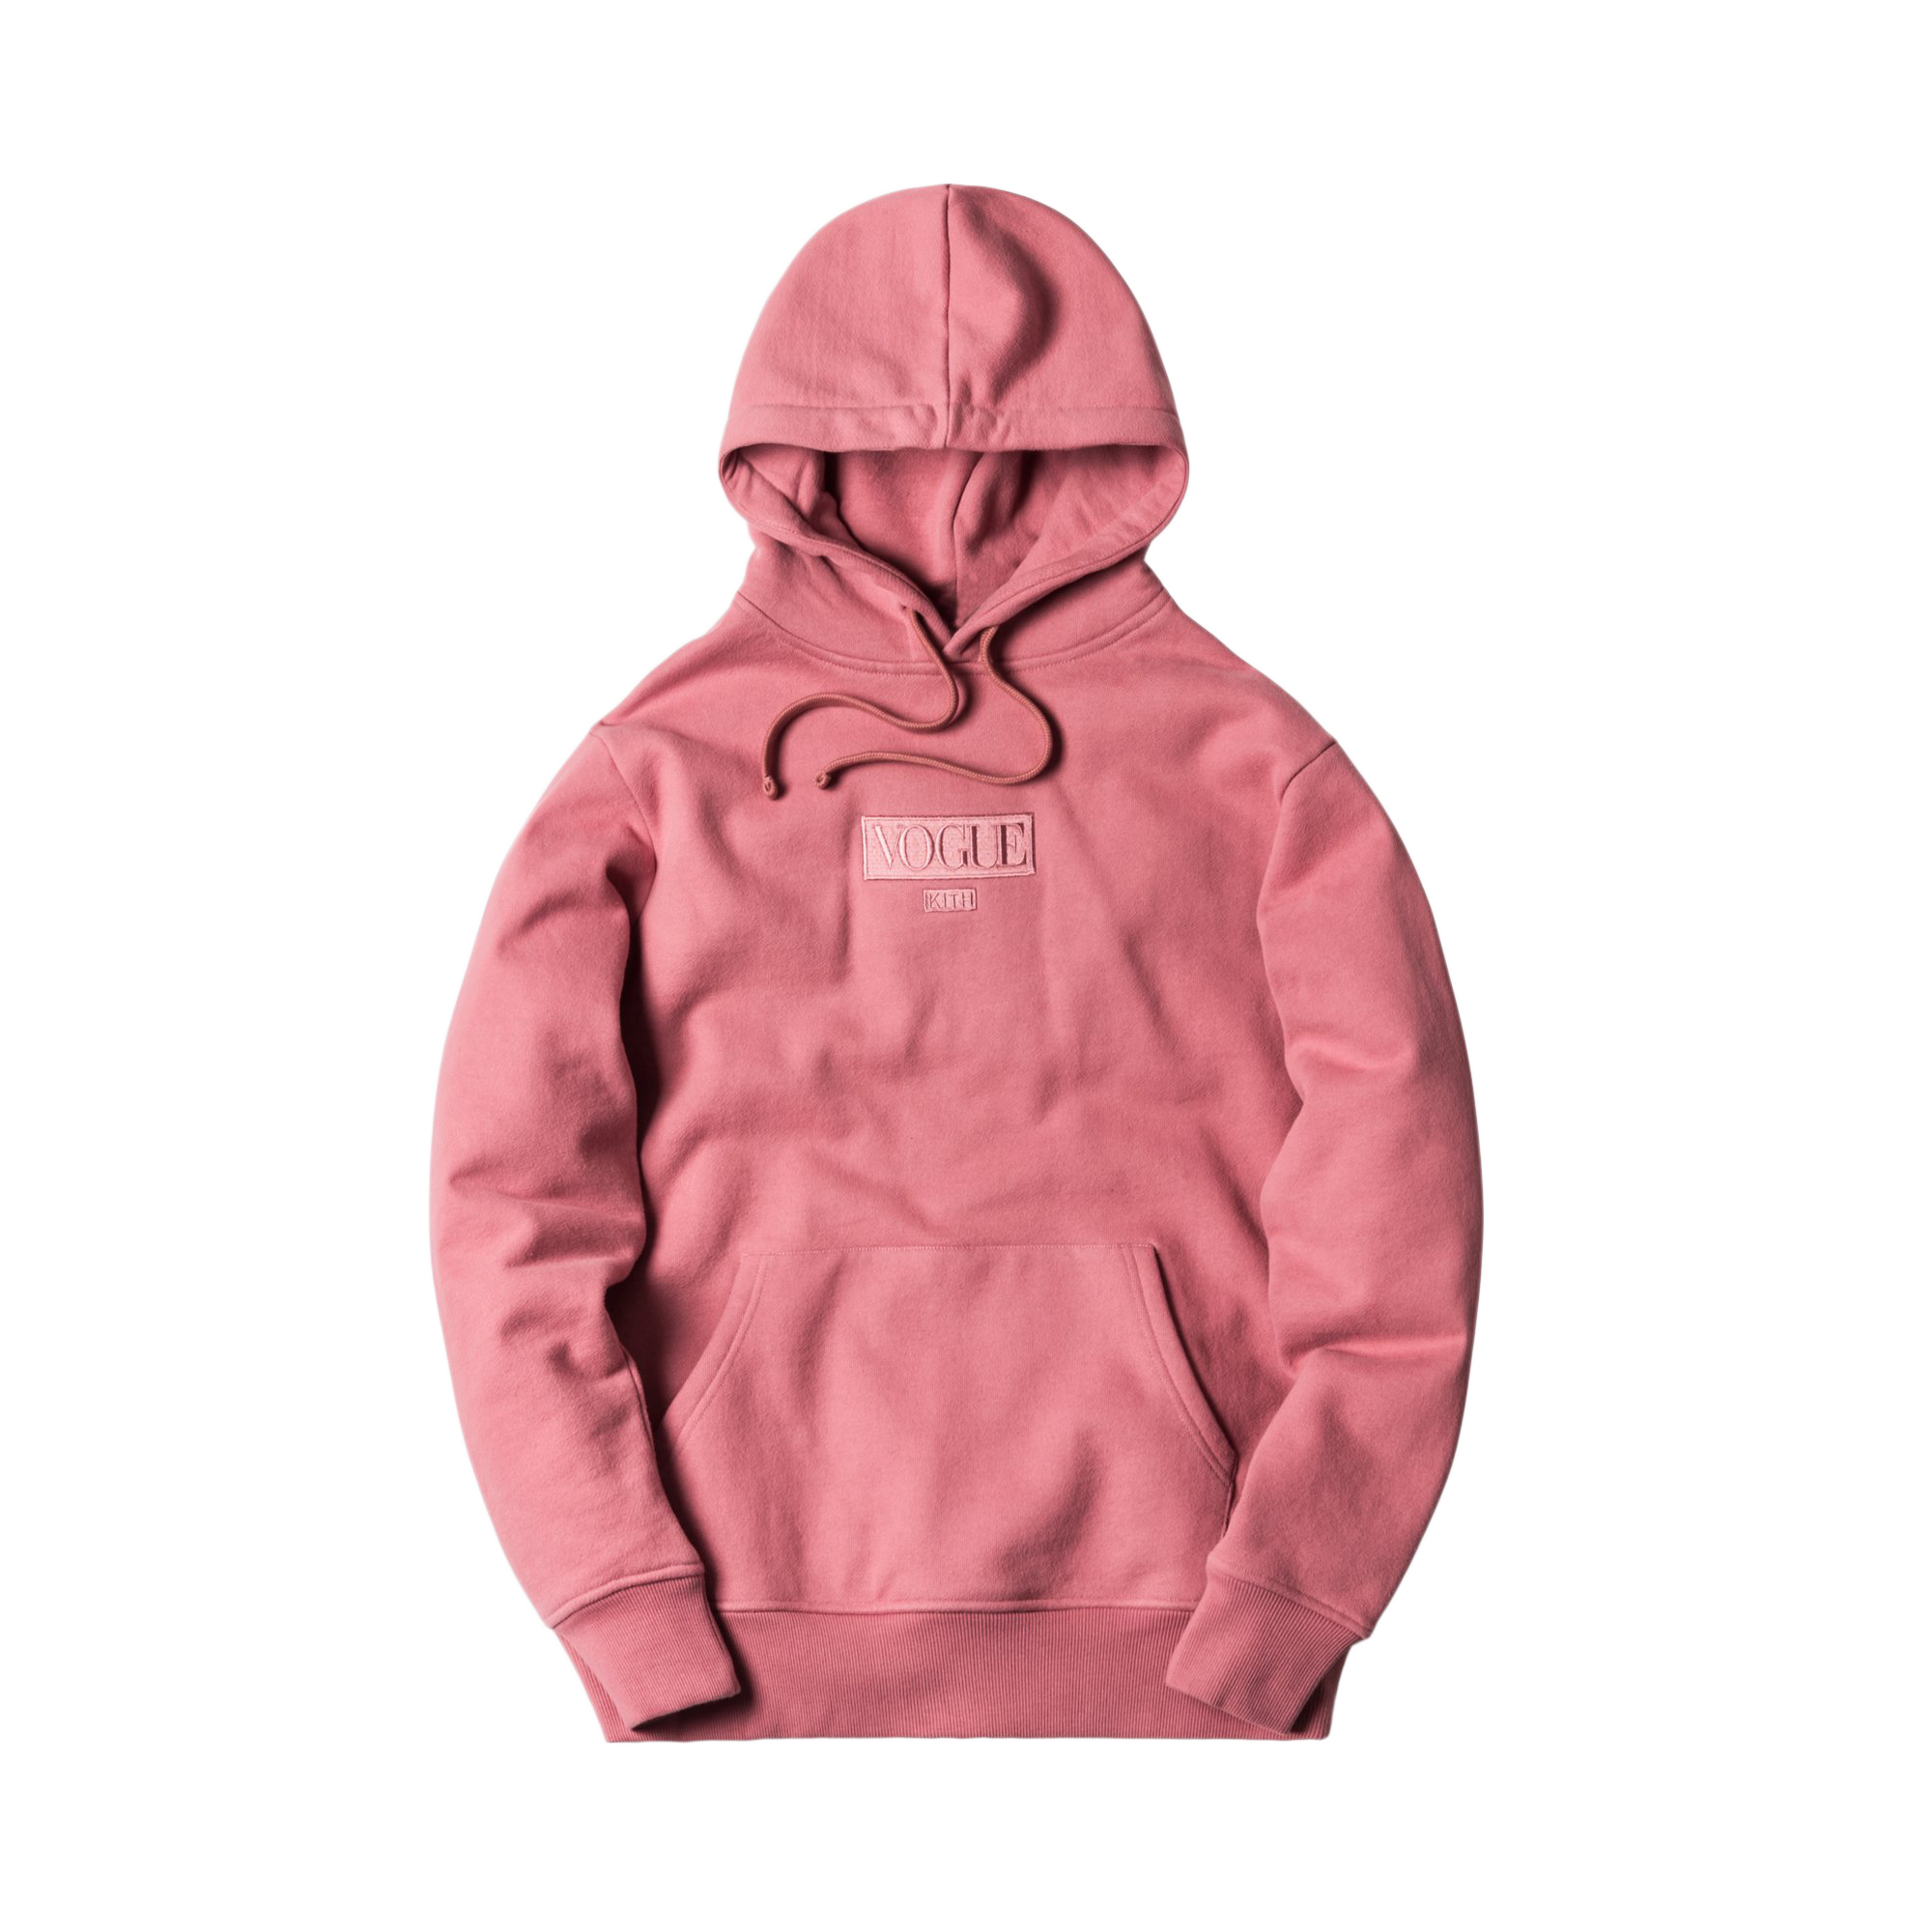 Kith x Vogue Hoodie Dusty Rose